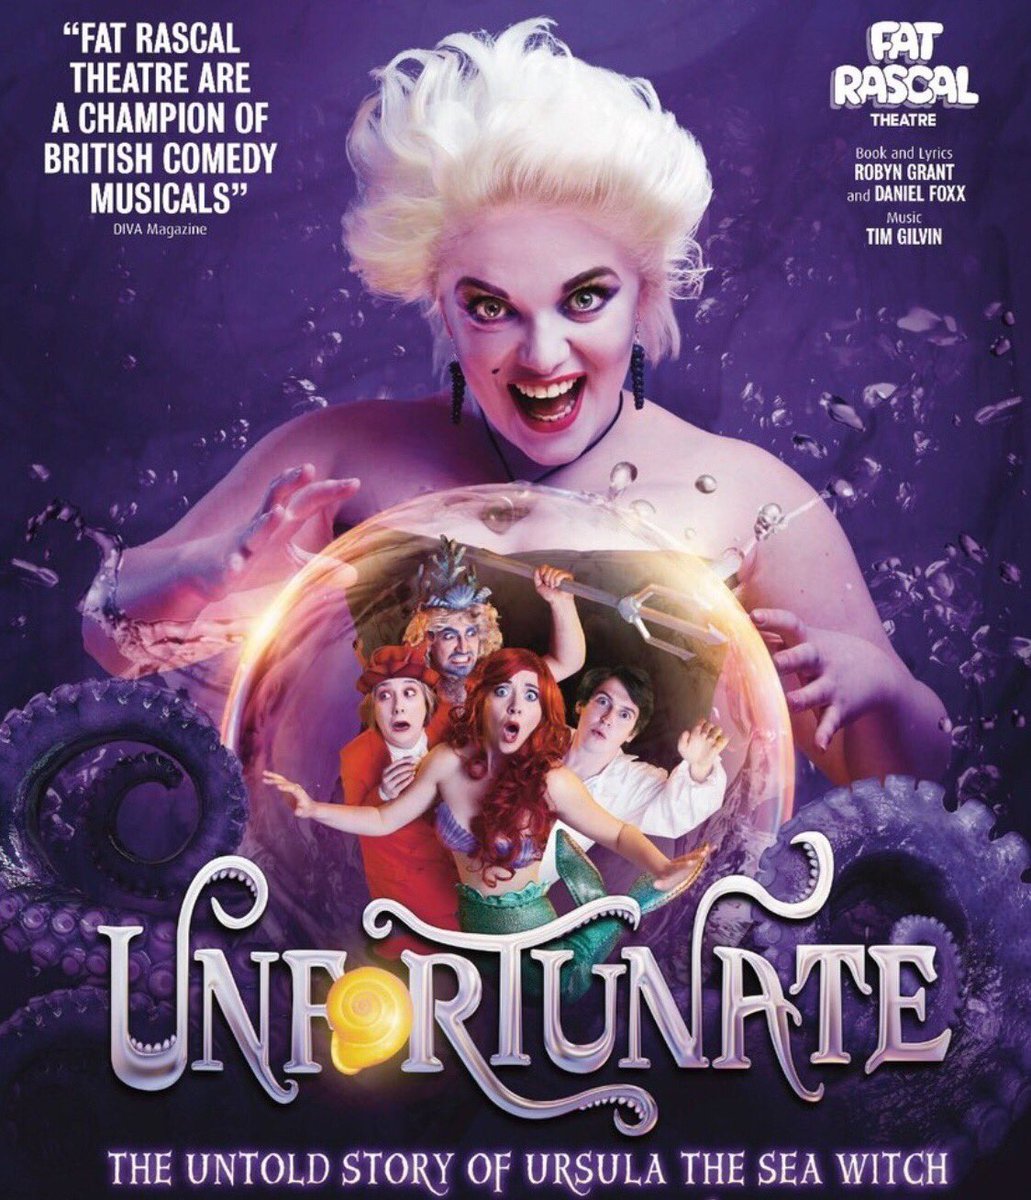 Just booked @WeAreFatRascal #UnfortunateMusical @KingsHeadThtr ... twice..
@WeAreFatRascal musical comedies answer to @mischiefcomedy